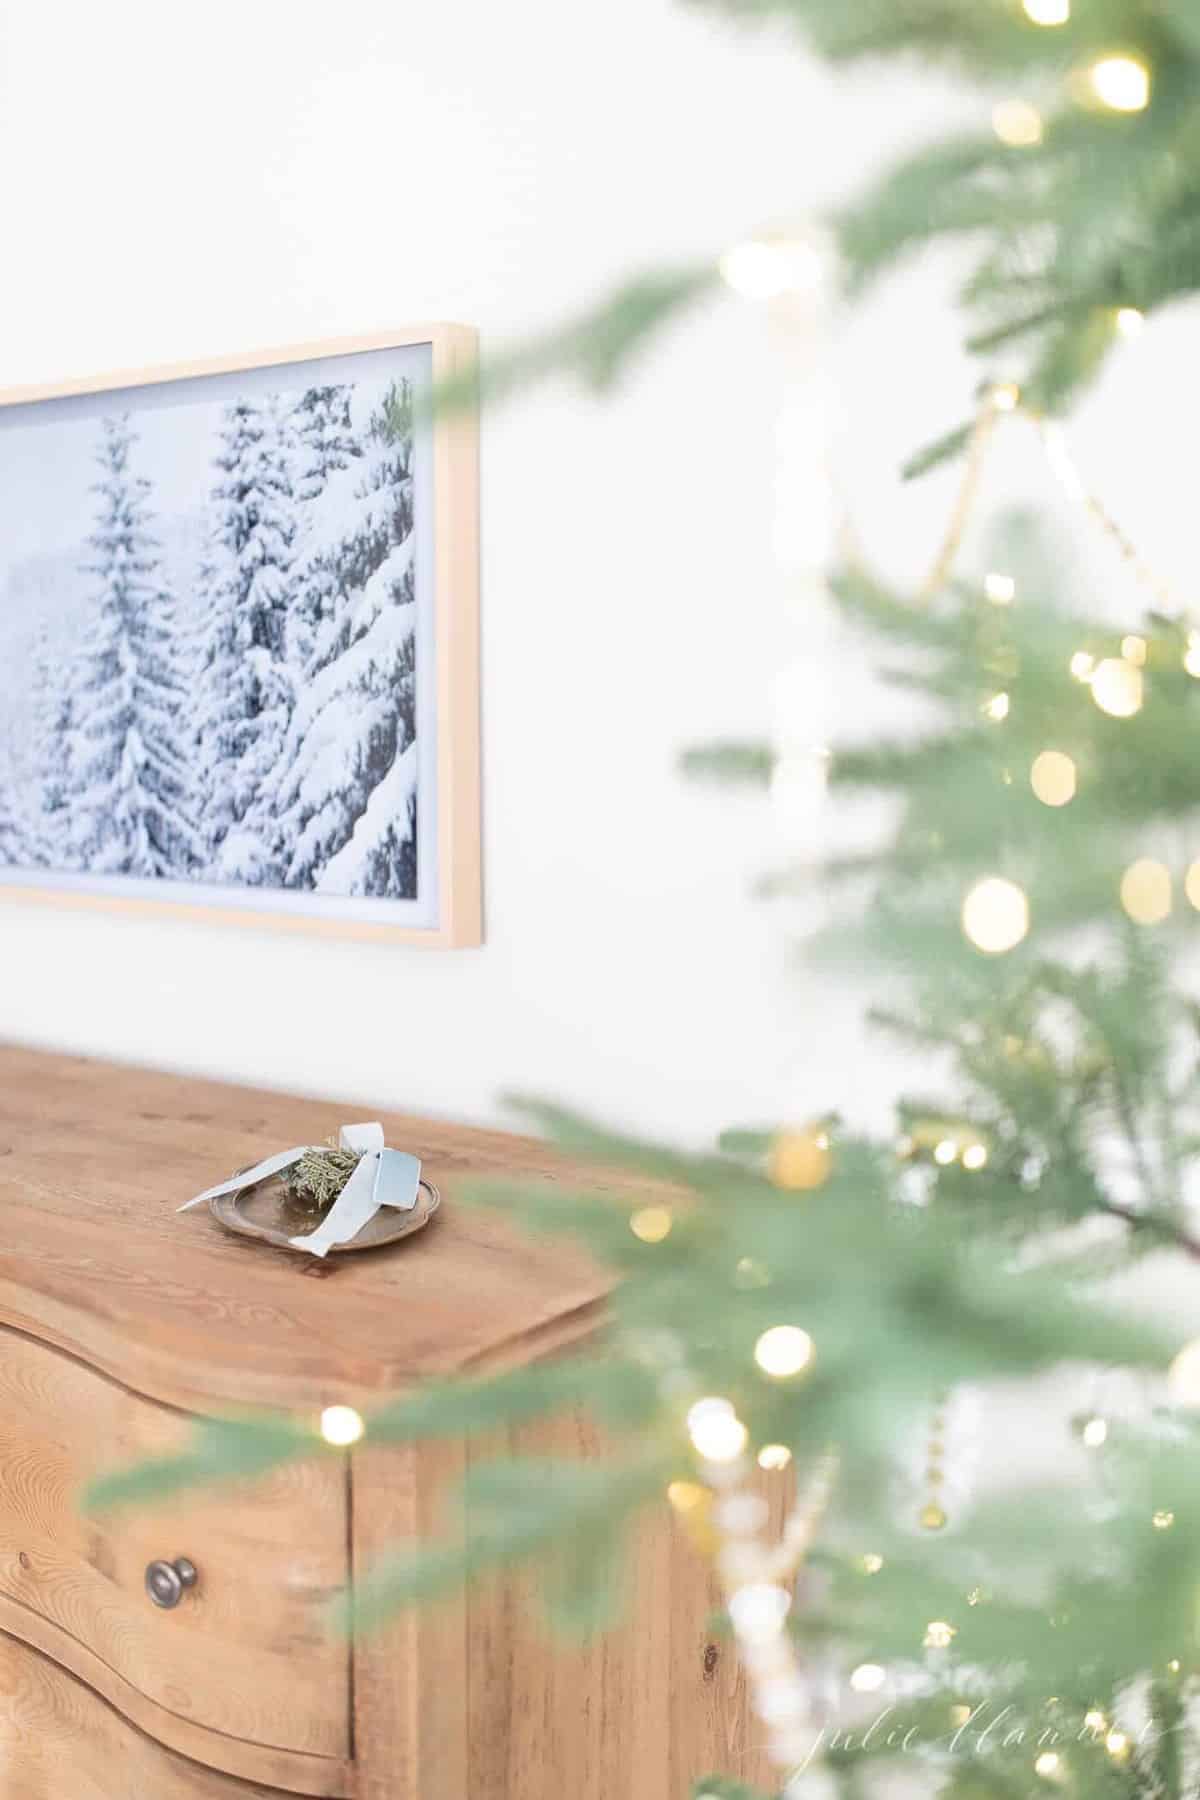 A Samsung art tv on the wall of a bedroom with a winter scene displayed, Christmas tree in foreground.